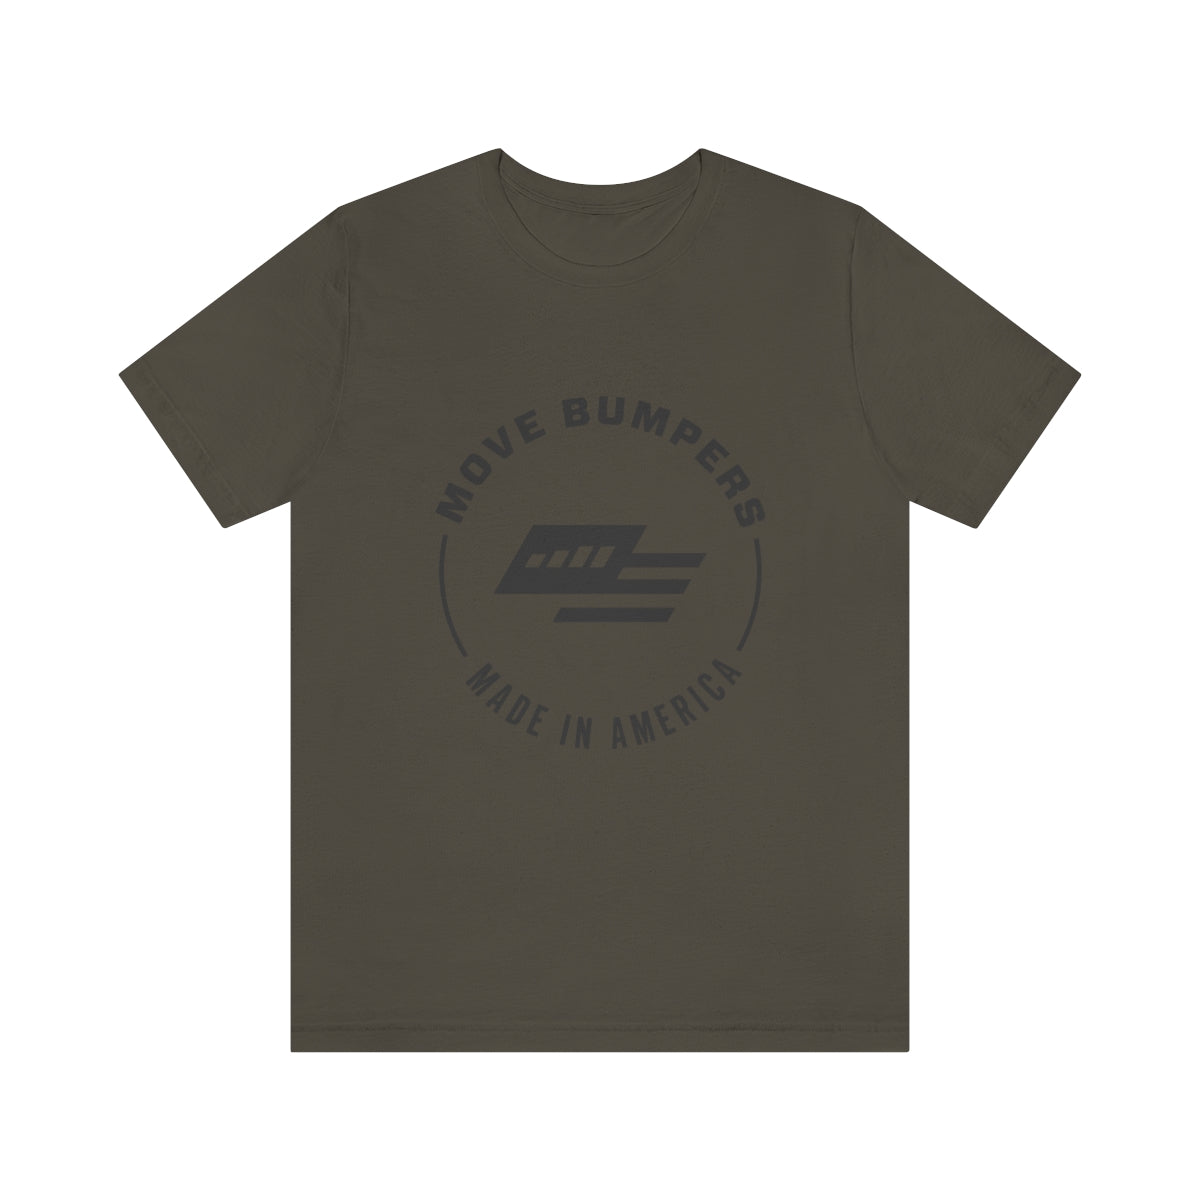 MOVE Bumpers - T-shirt Army